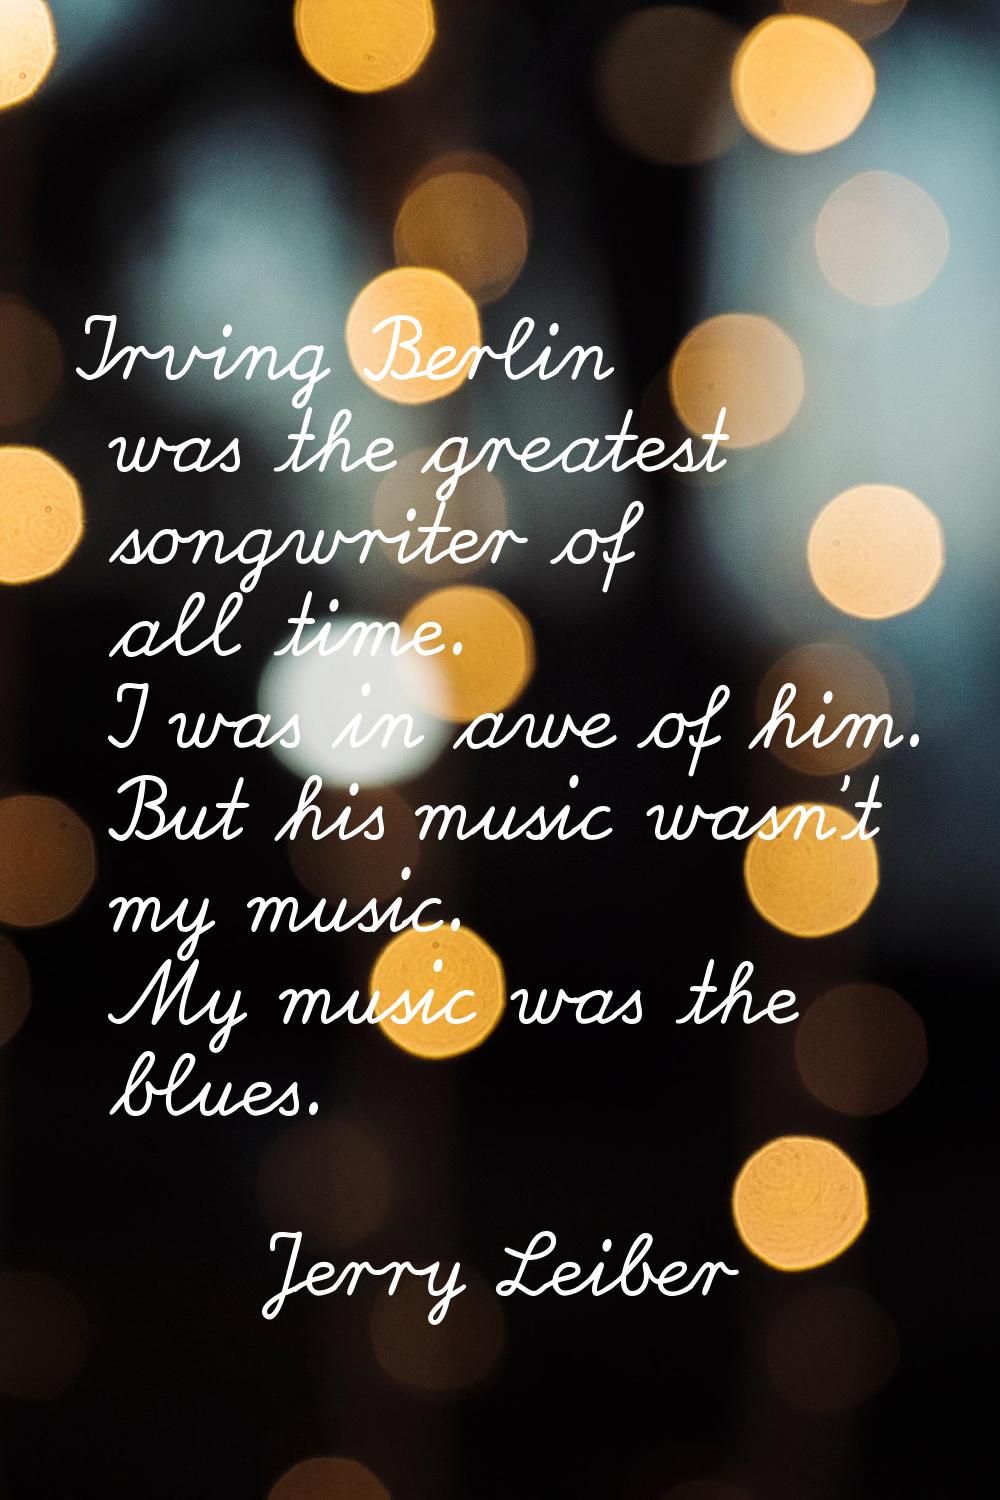 Irving Berlin was the greatest songwriter of all time. I was in awe of him. But his music wasn't my